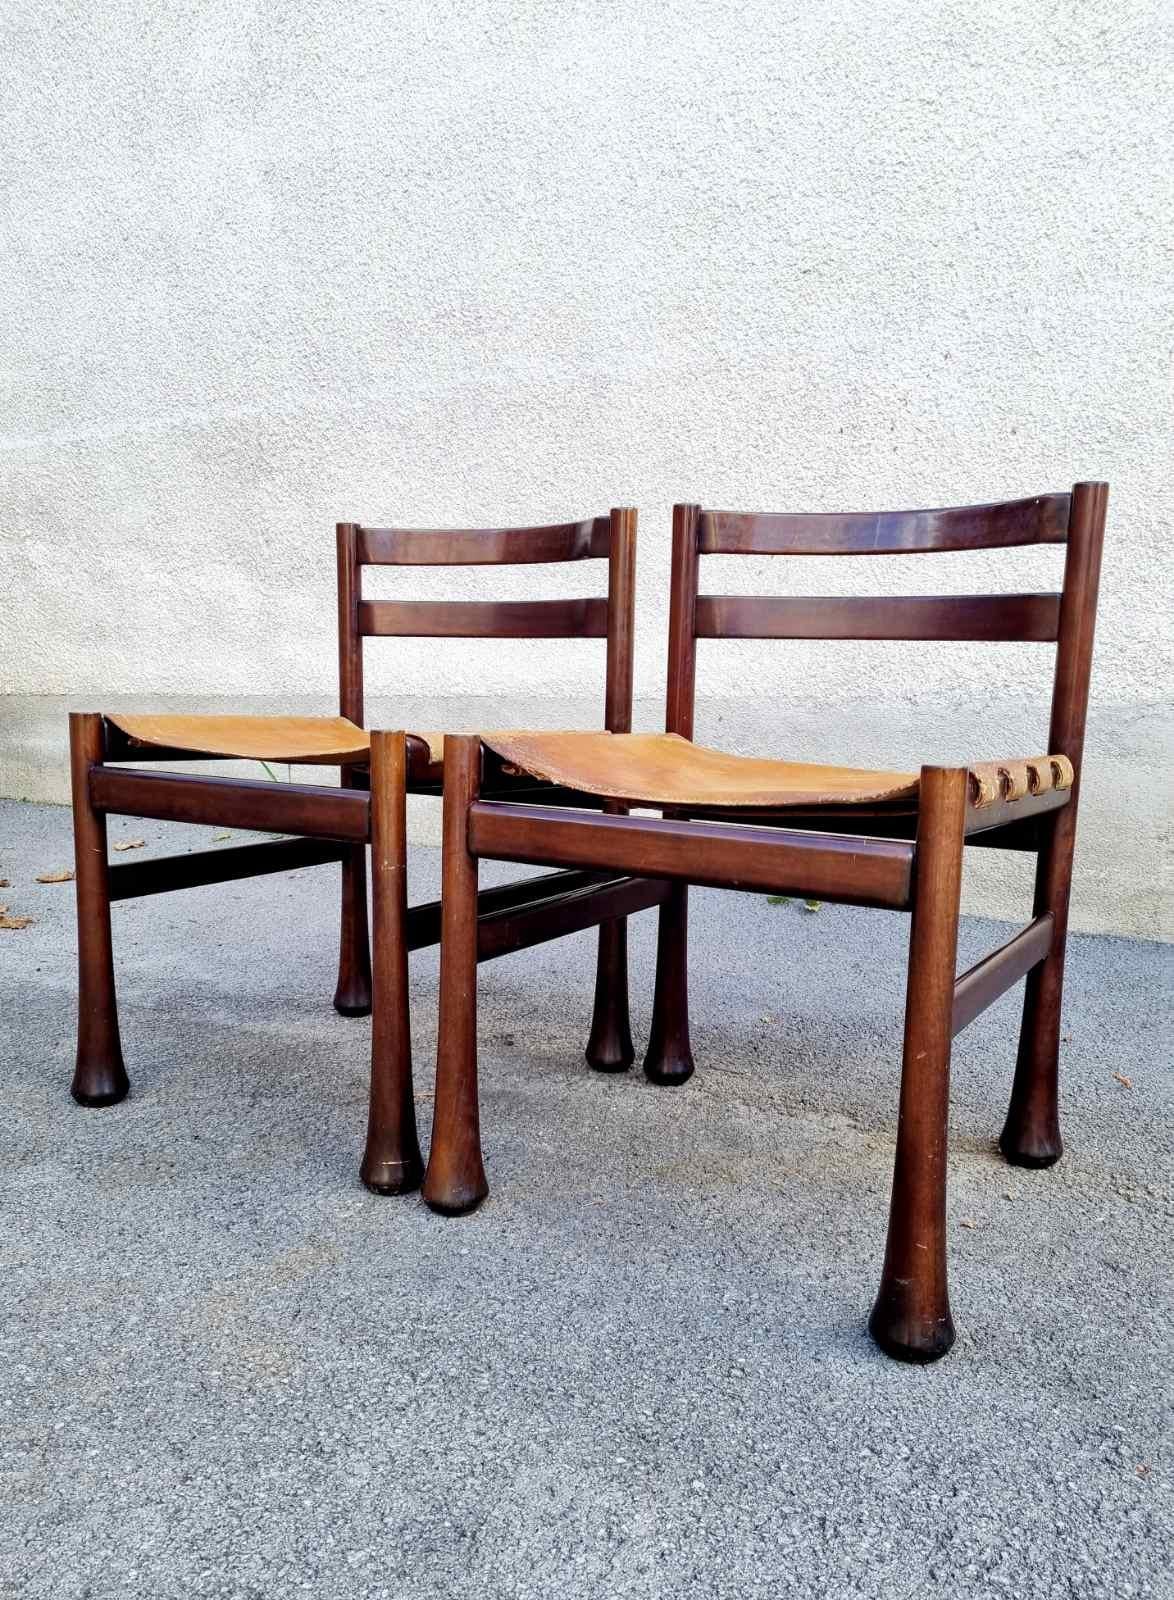 Rare pair of dining chairs designed by Luciano Frigerio. Made in Italy in the 70s
Rosewood and leather.
Deeply sculpted frames with curved slat-back design and thick, robust legs for optimal stability and support. Wide, spacious leather seats are